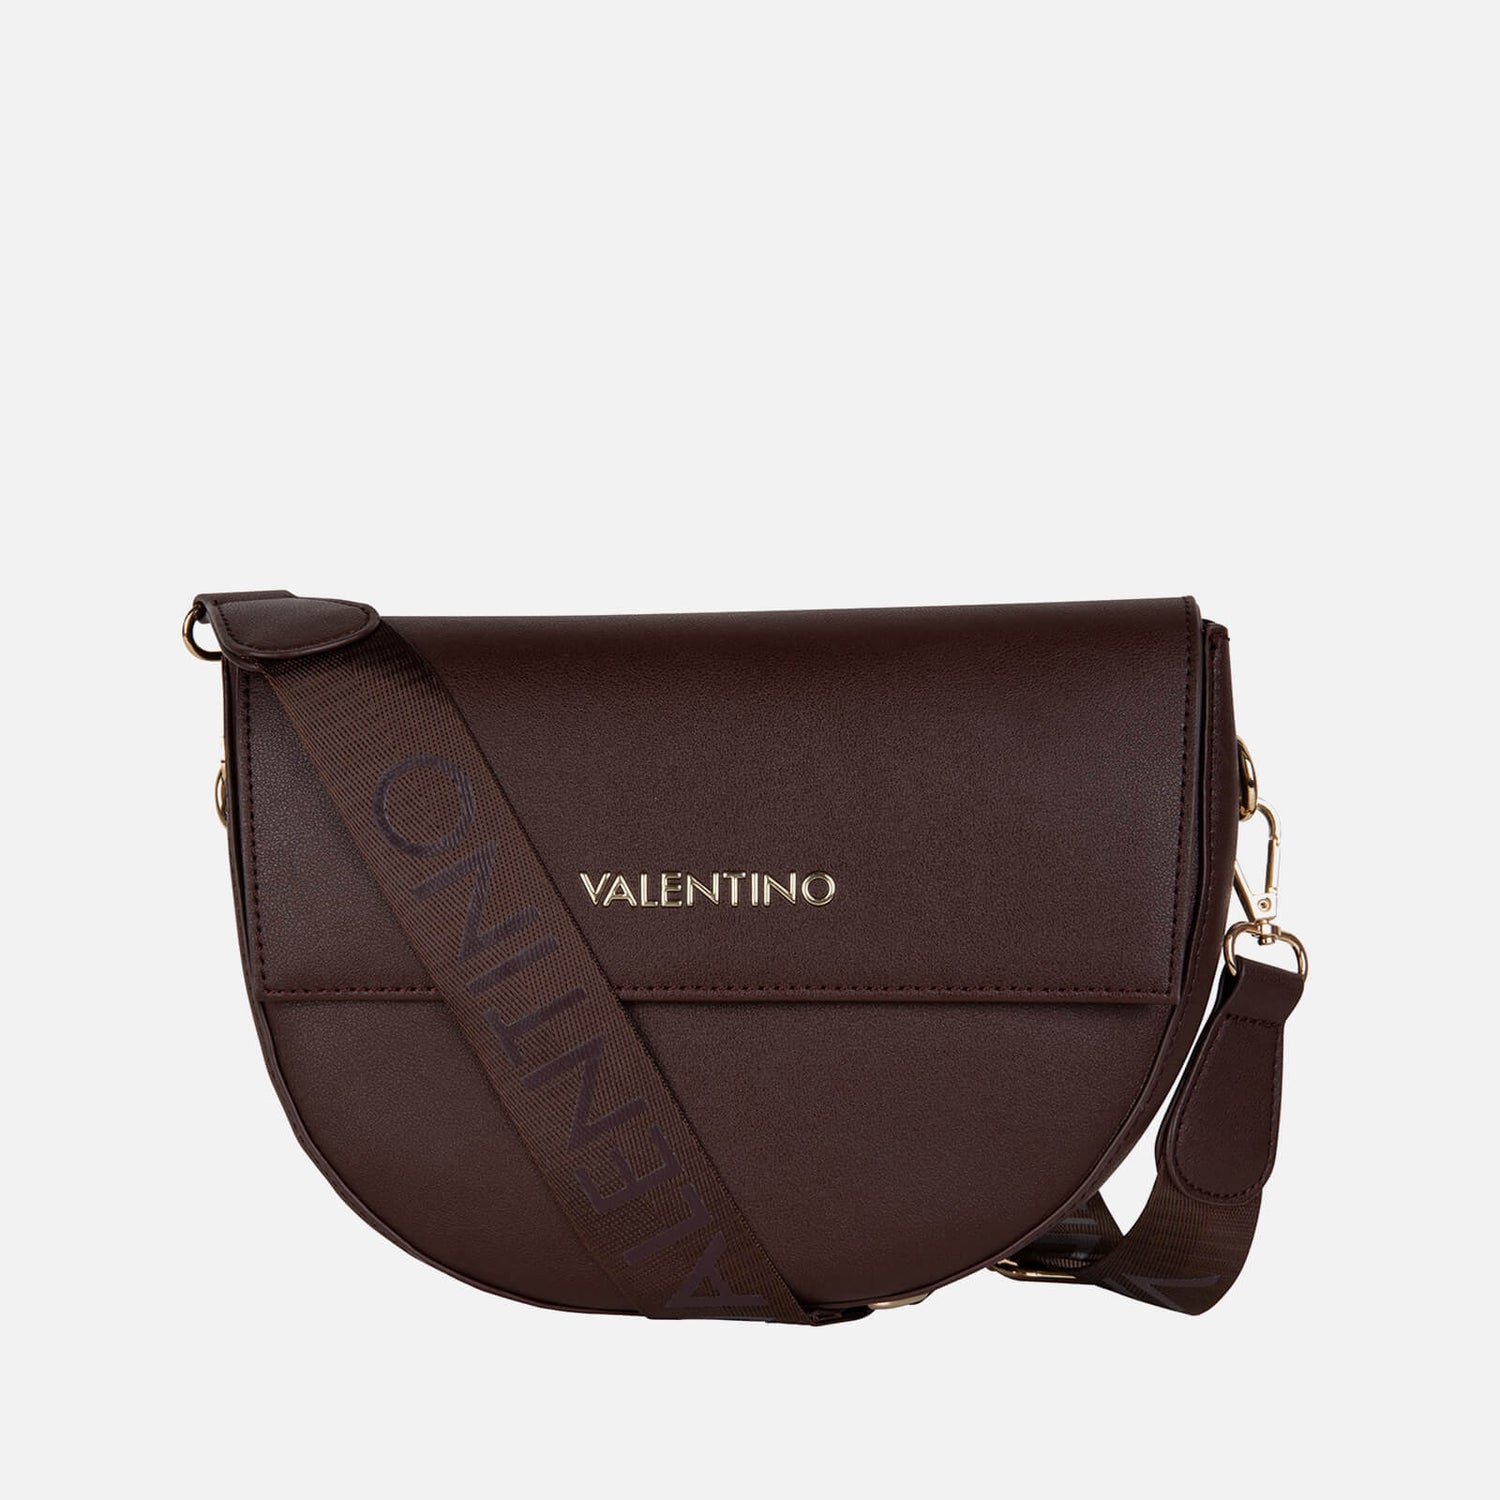 Valentino Bags Faux Leather Shoulder Bag